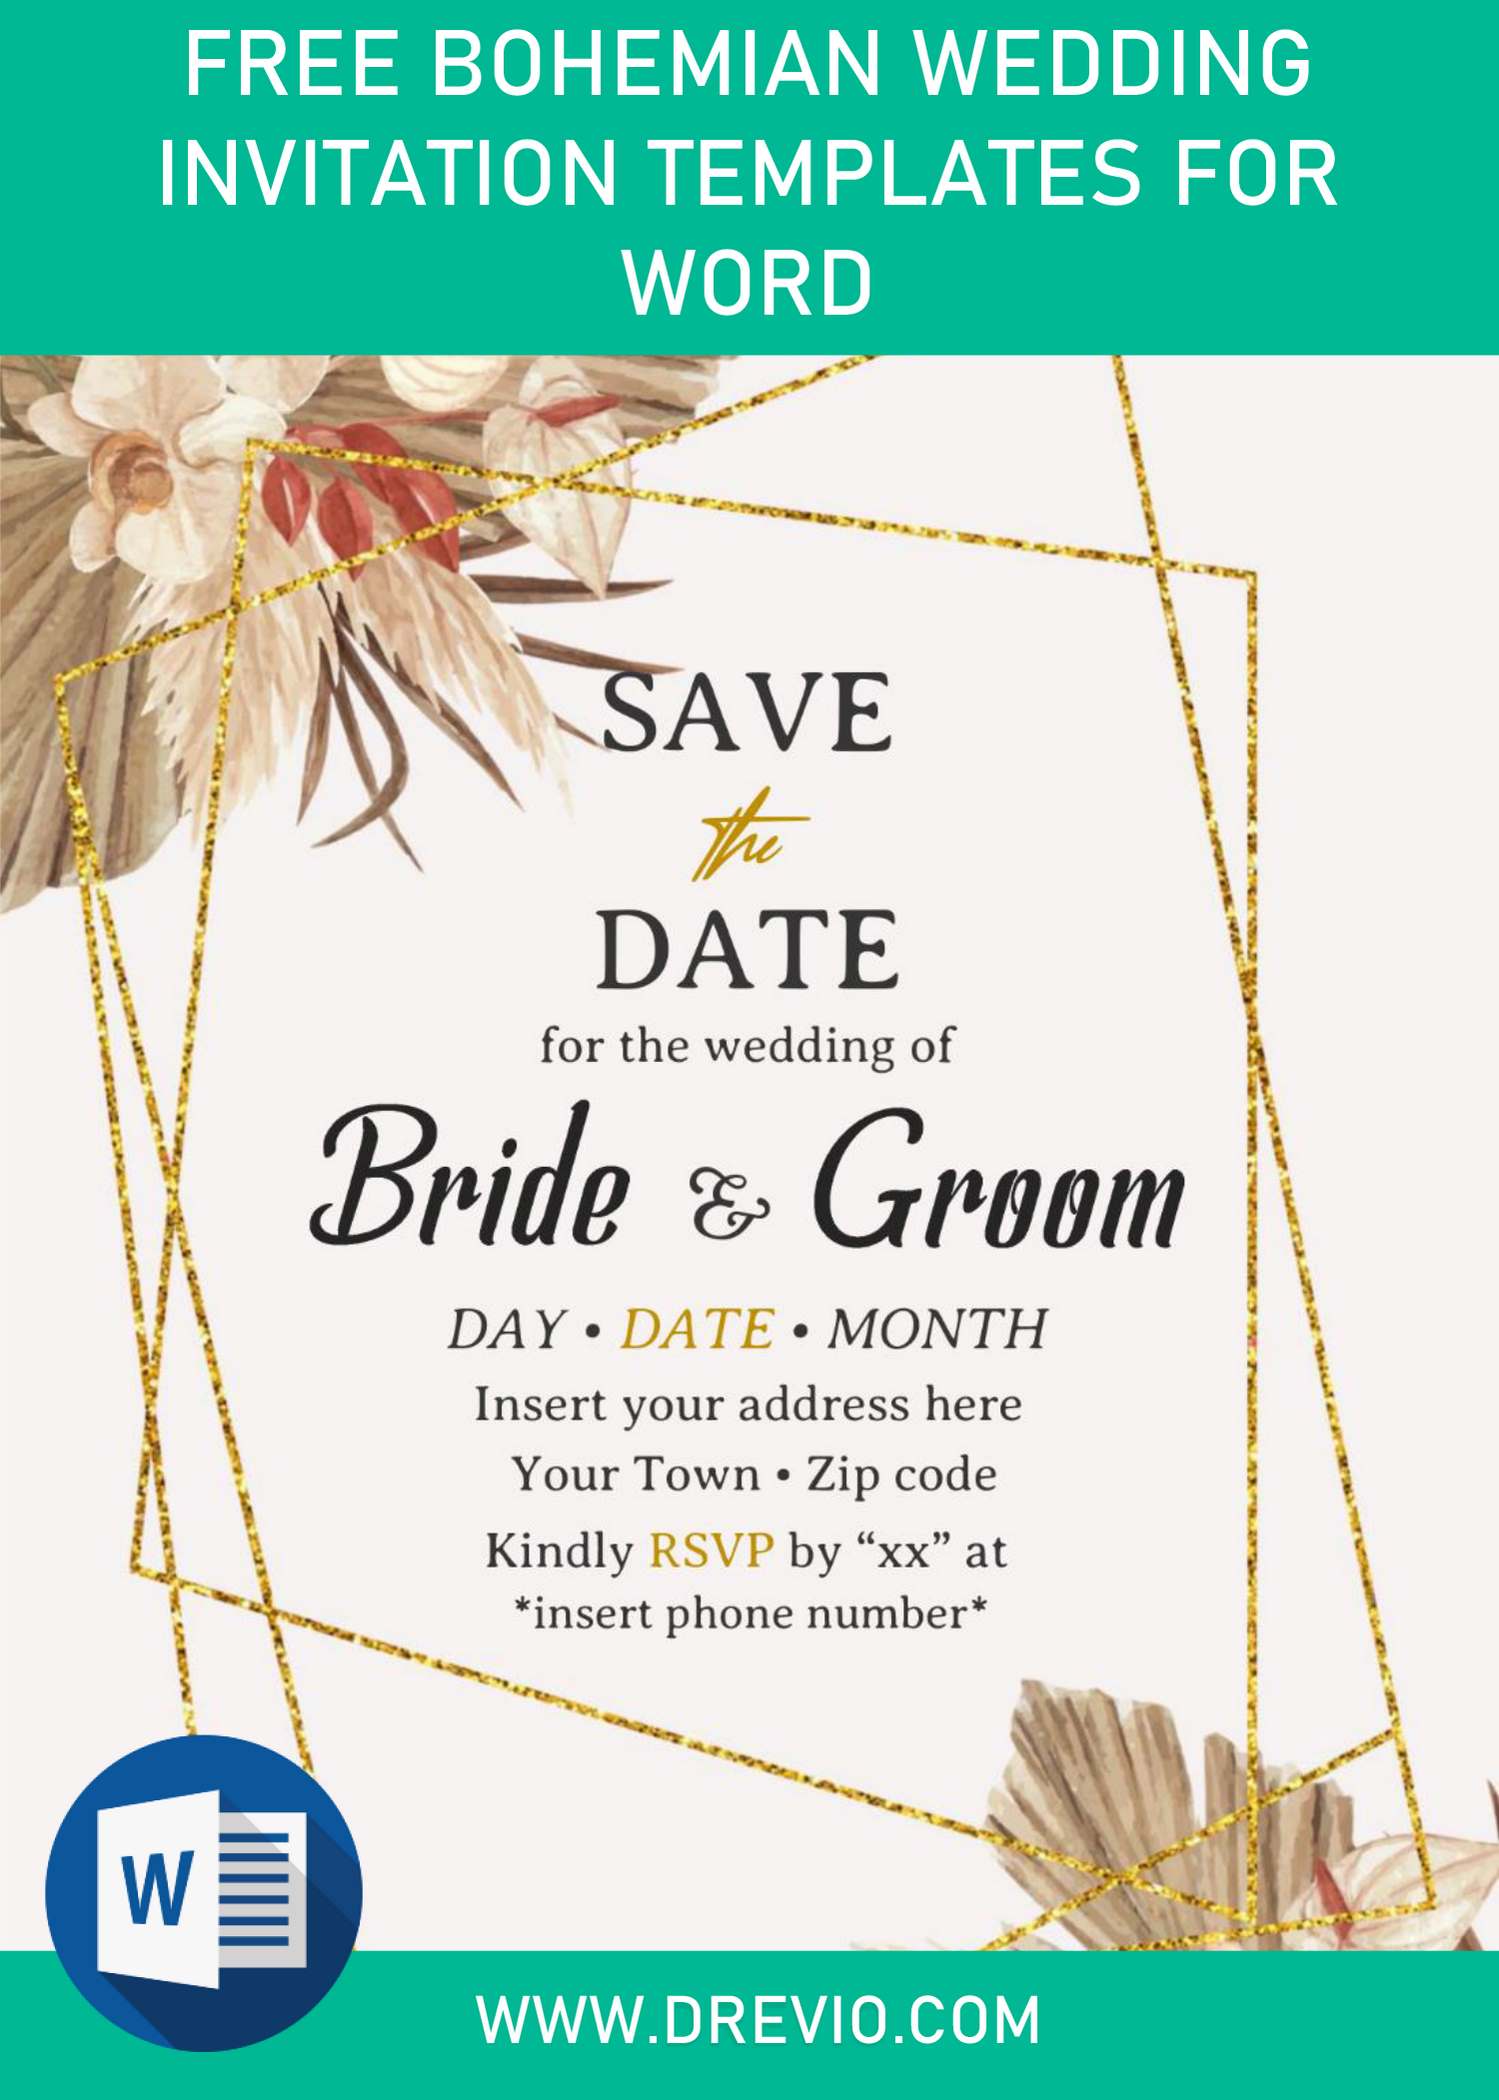 Free Bohemian Wedding Invitation Templates For Word and has